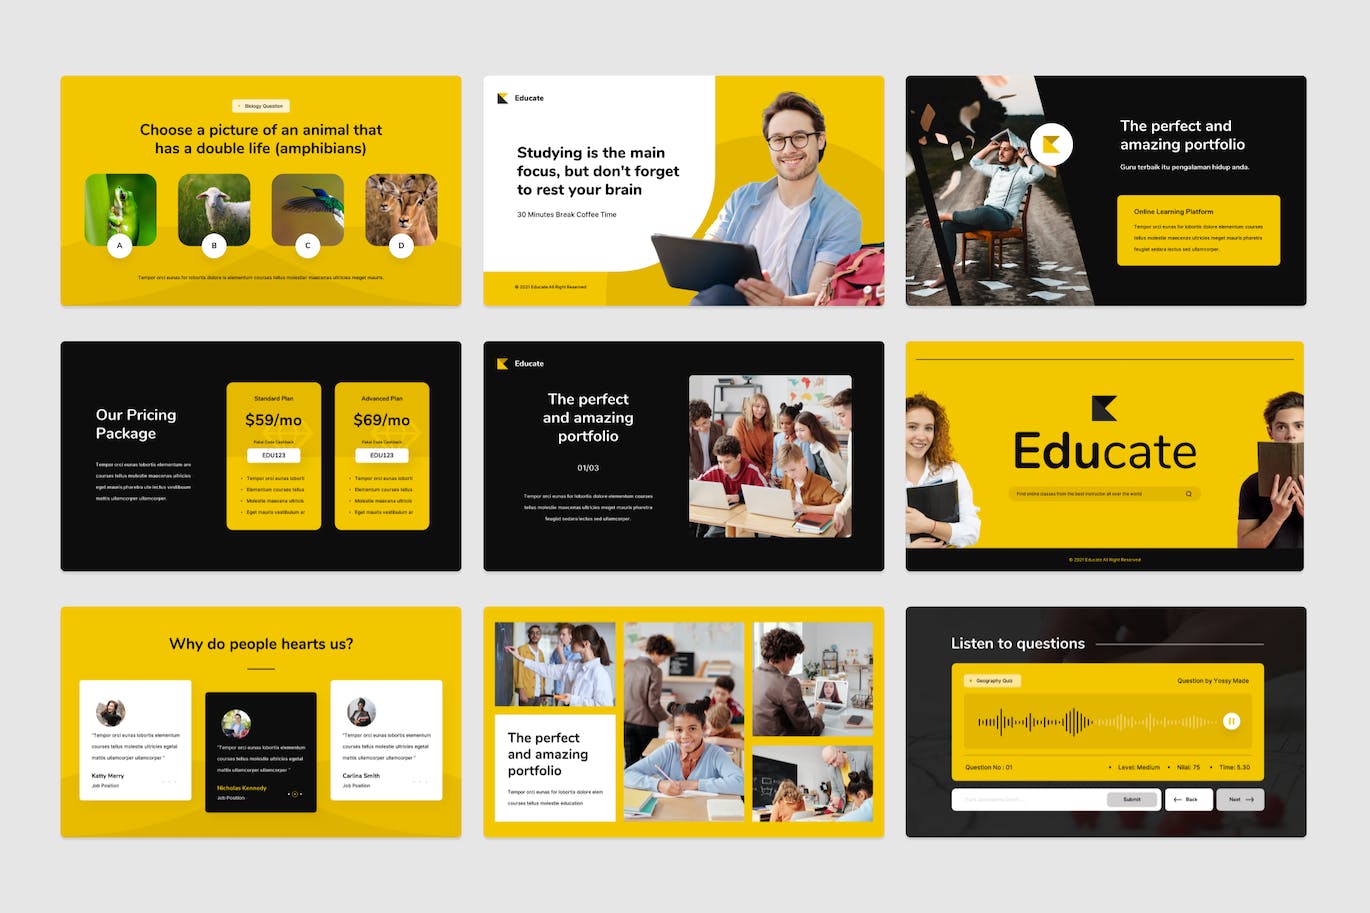 A selection of images of adorable presentation template slides in yellow and black colors.